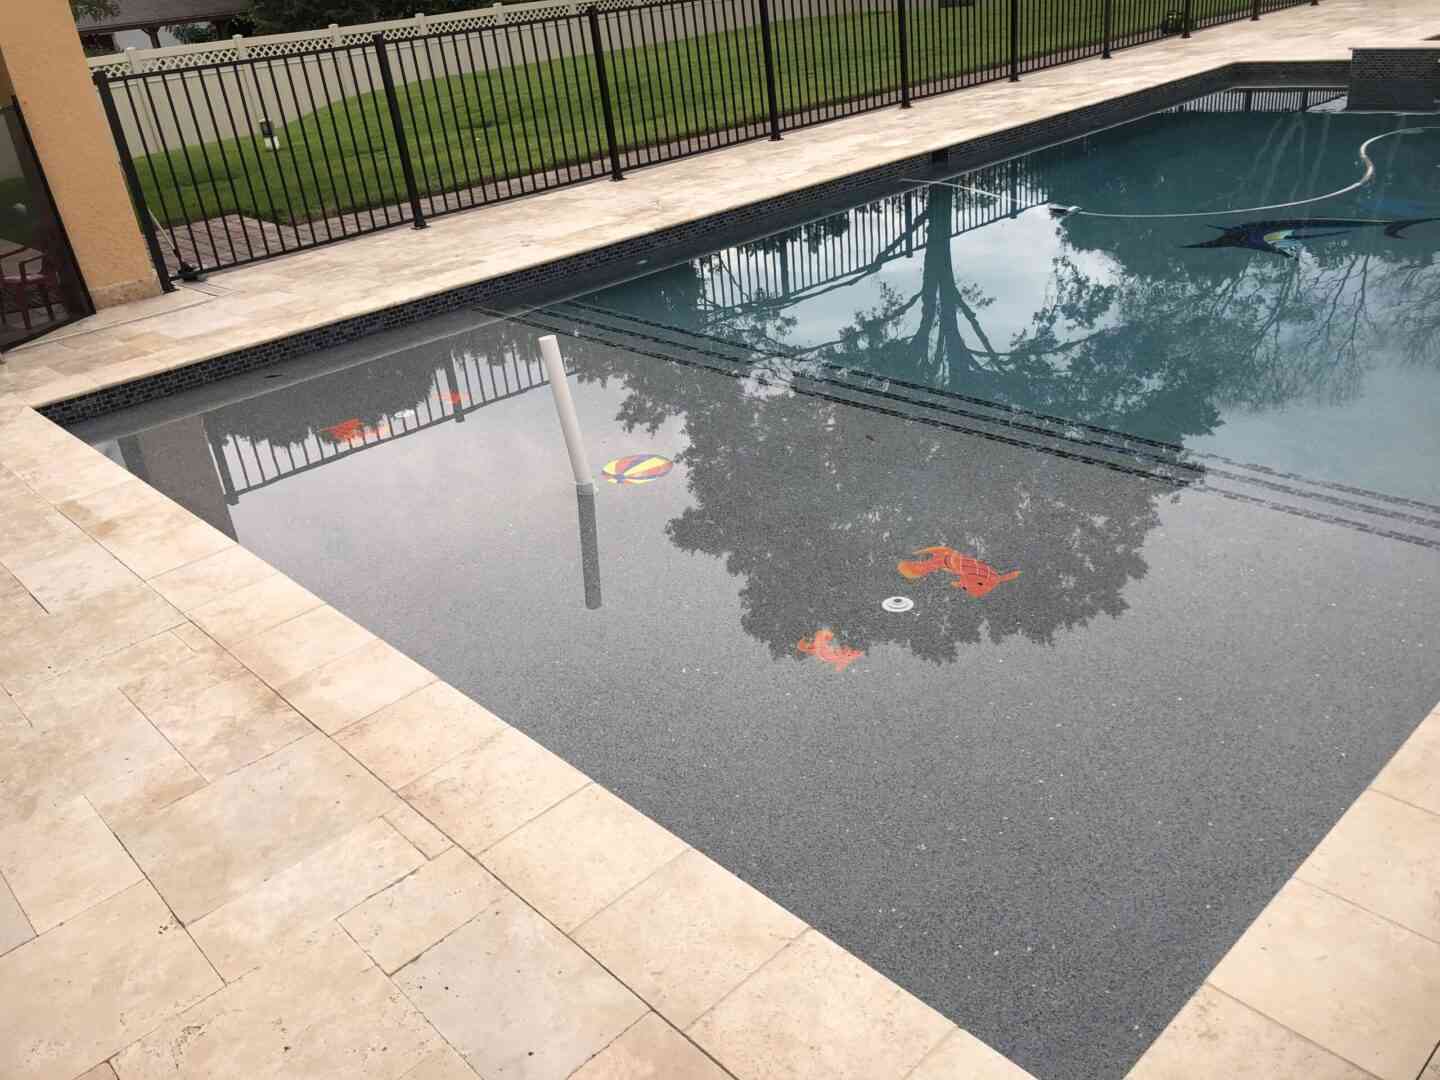 A pool with fish floor designs